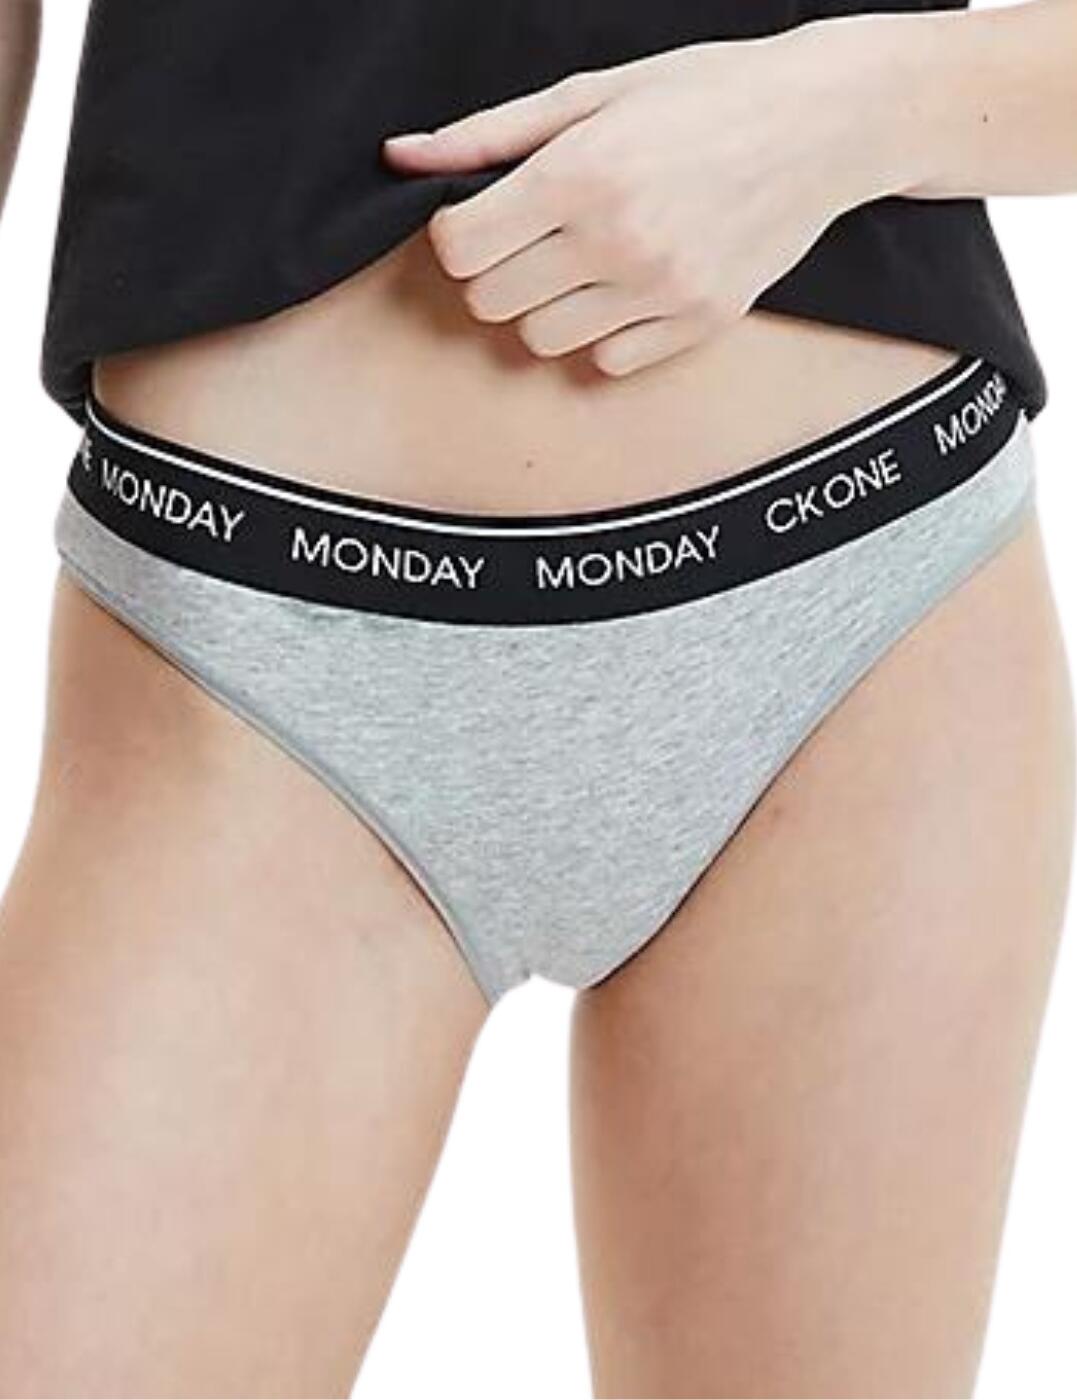 Women's Calvin Klein CK One Days of the Week 7-Pack Thong Panty